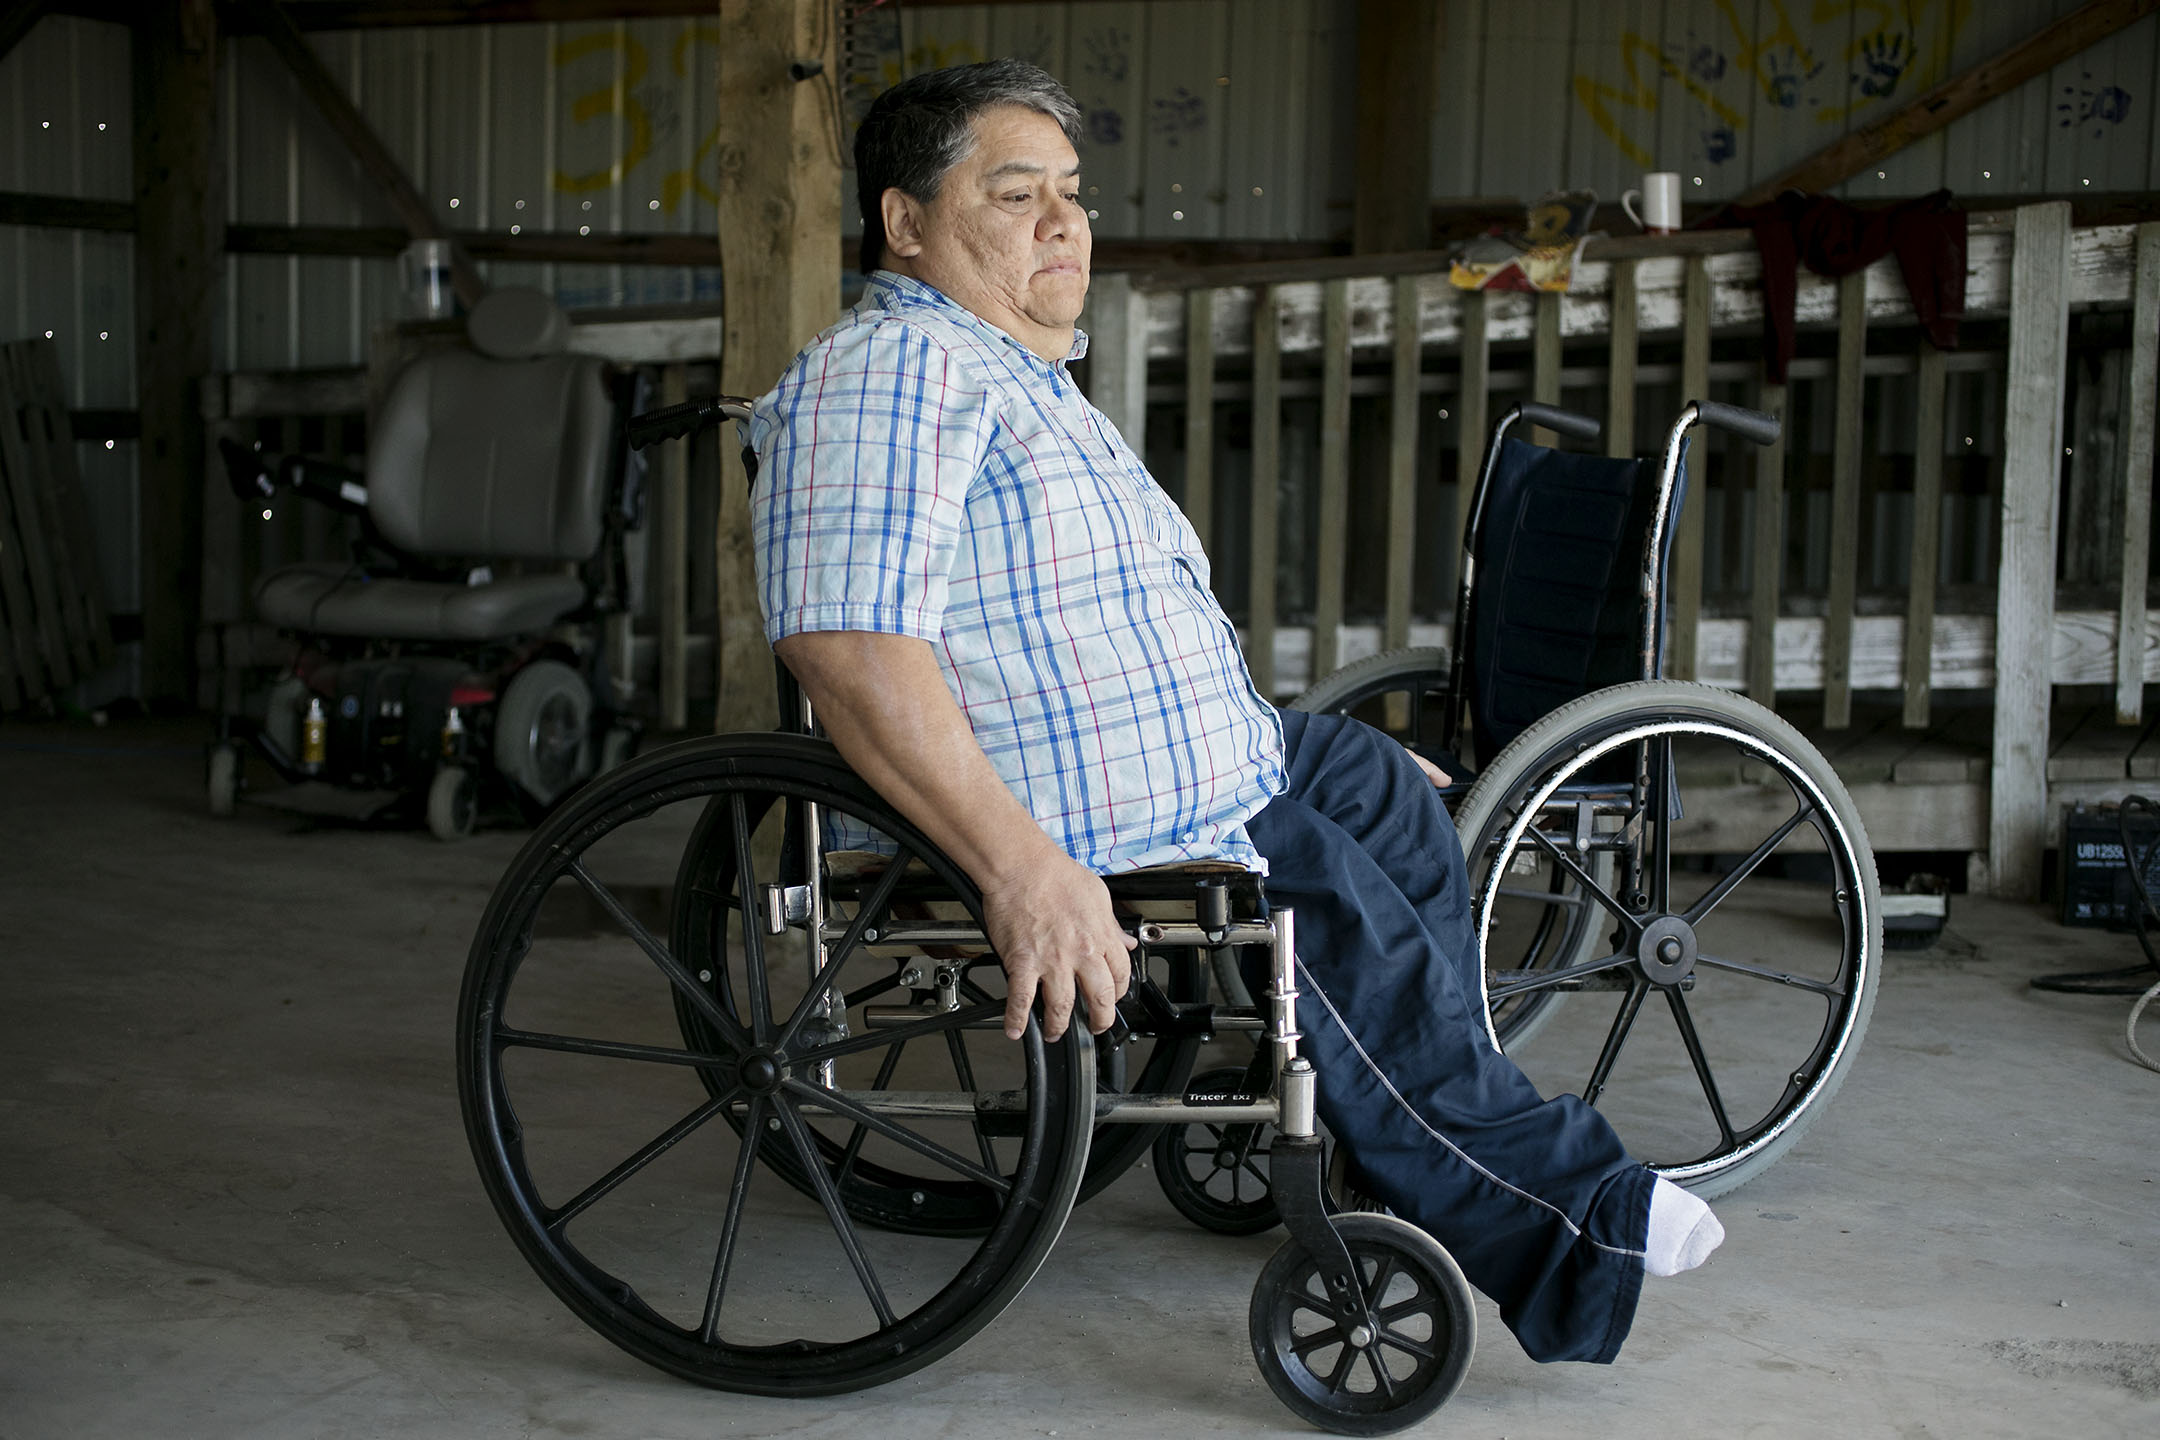 Kermit Horn’s legs are paralyzed due to polio. He has had to reinforce the seat of his wheelchair with leather straps. Medicare rejected his application for a new one, so the Public Health Nursing Program helped him, thanks to additional revenue from third party billing.